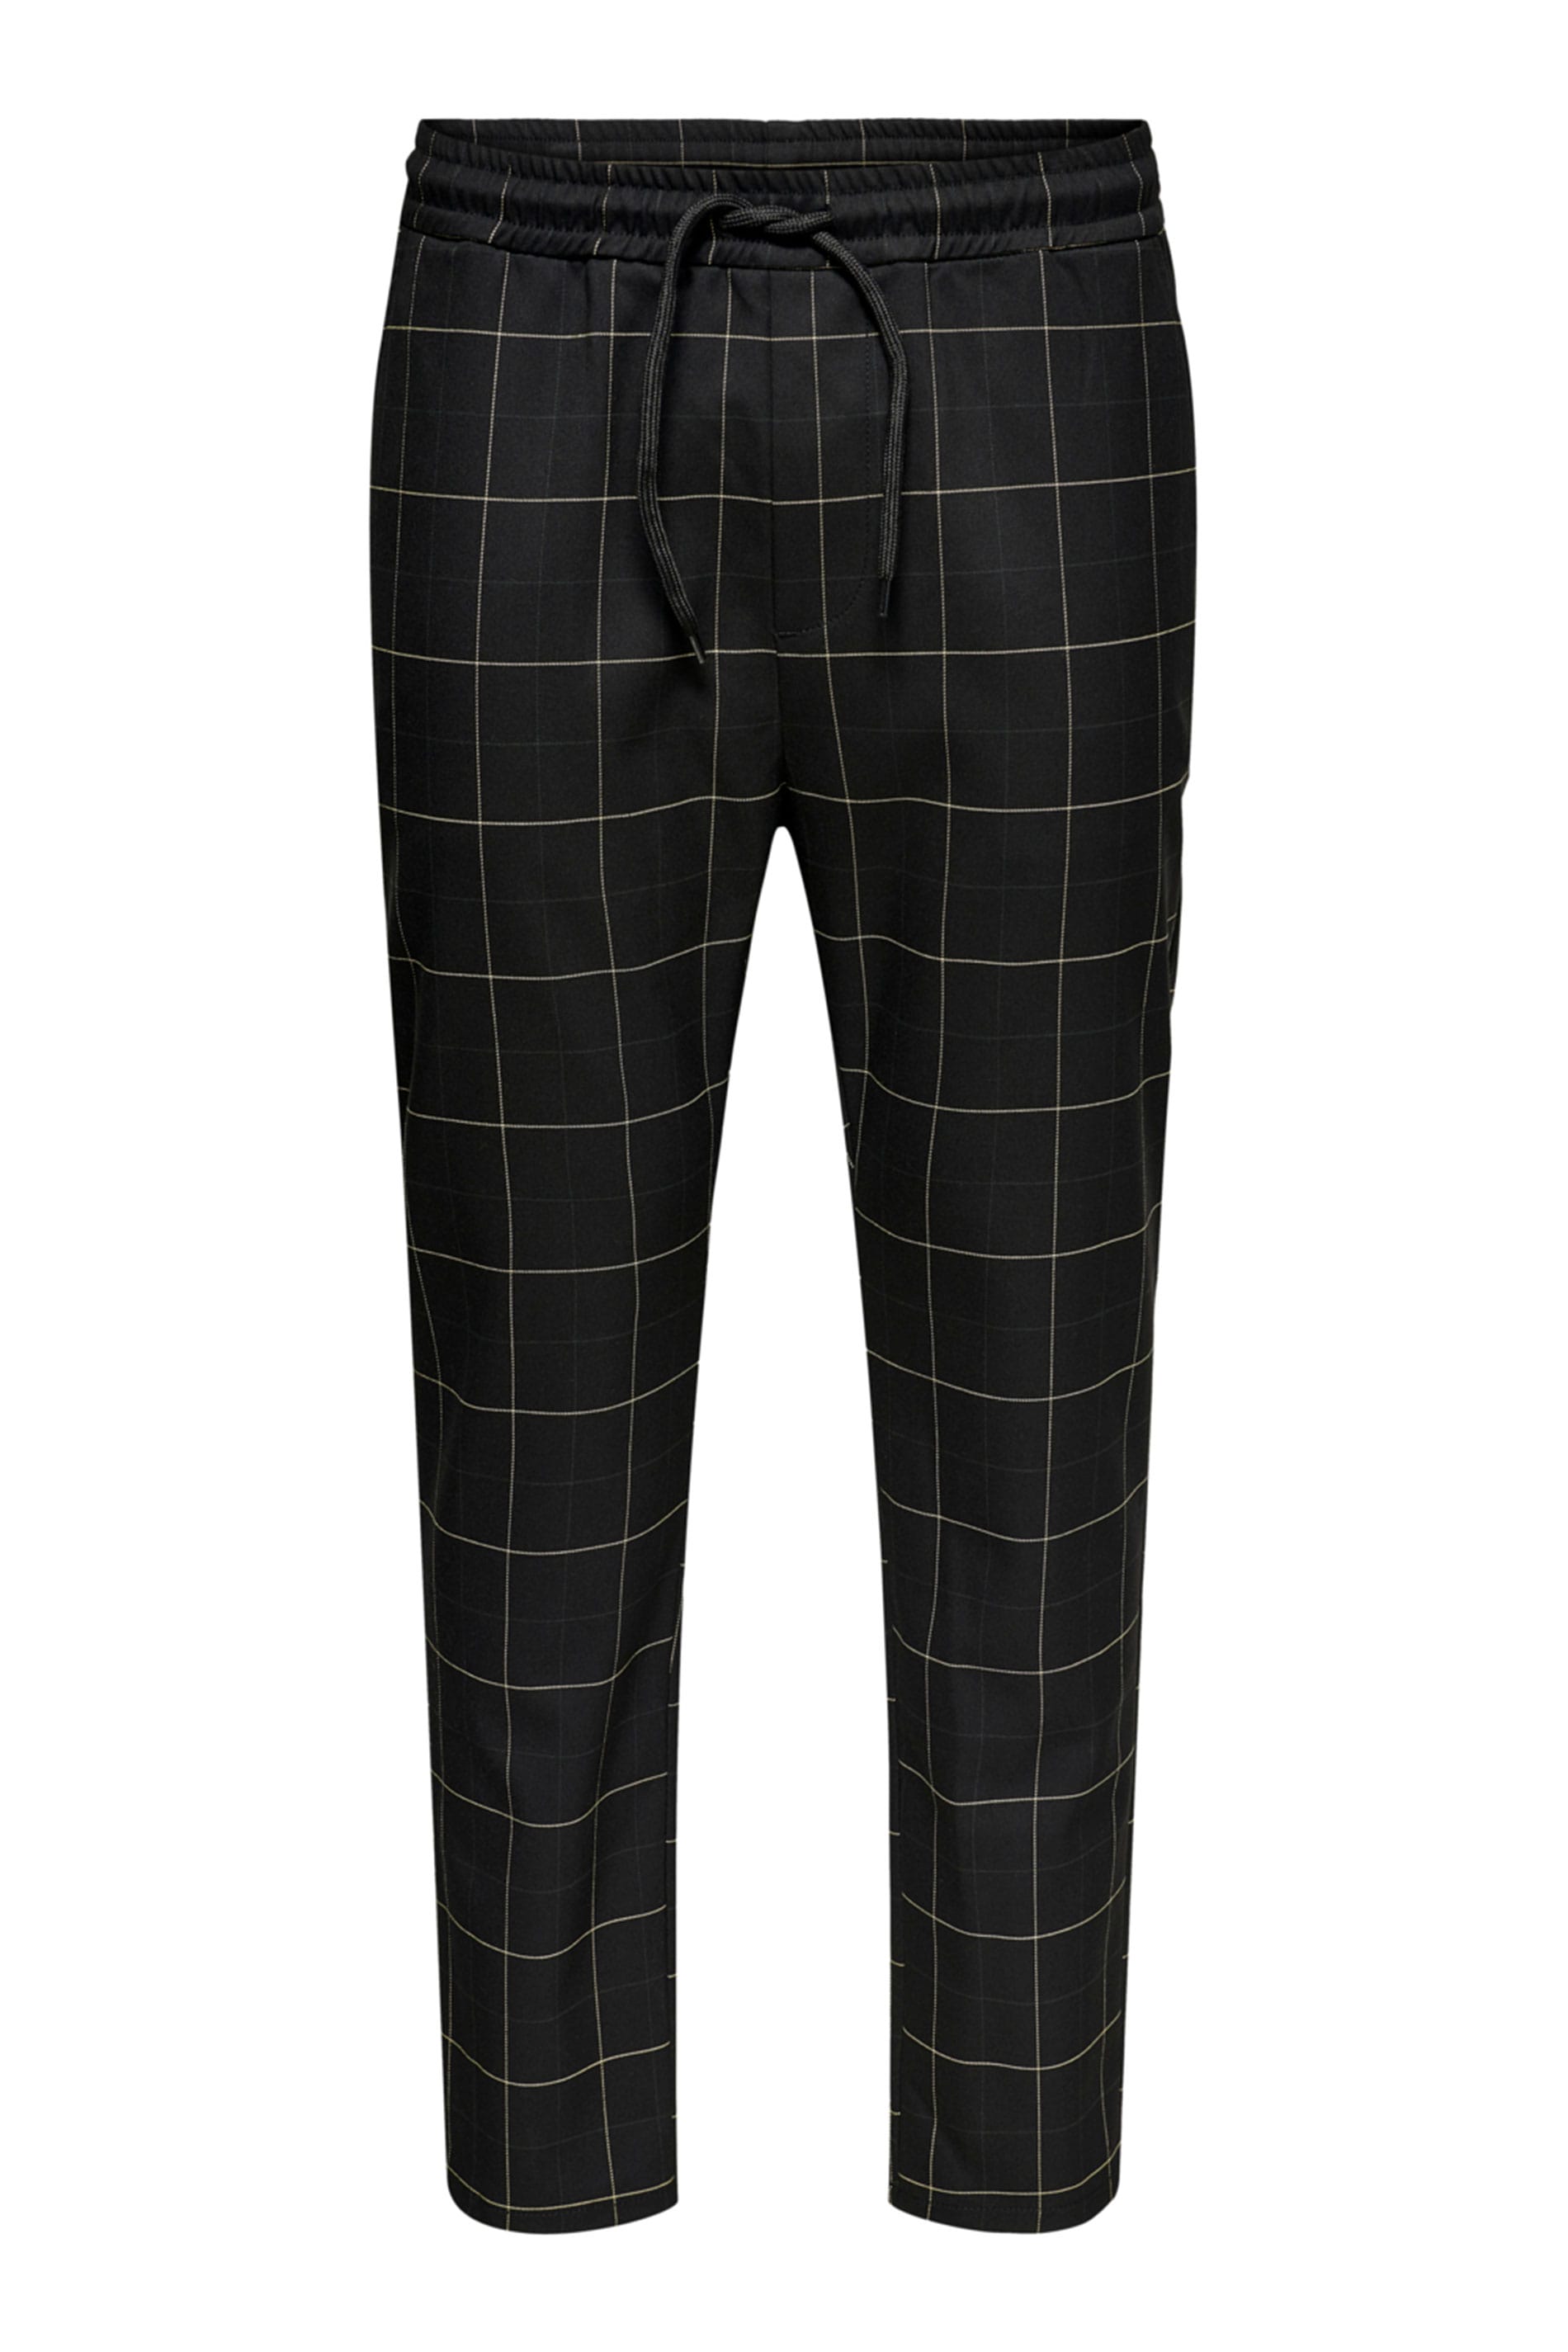 ONLY & SONS Big & Tall Black Check Trousers 1